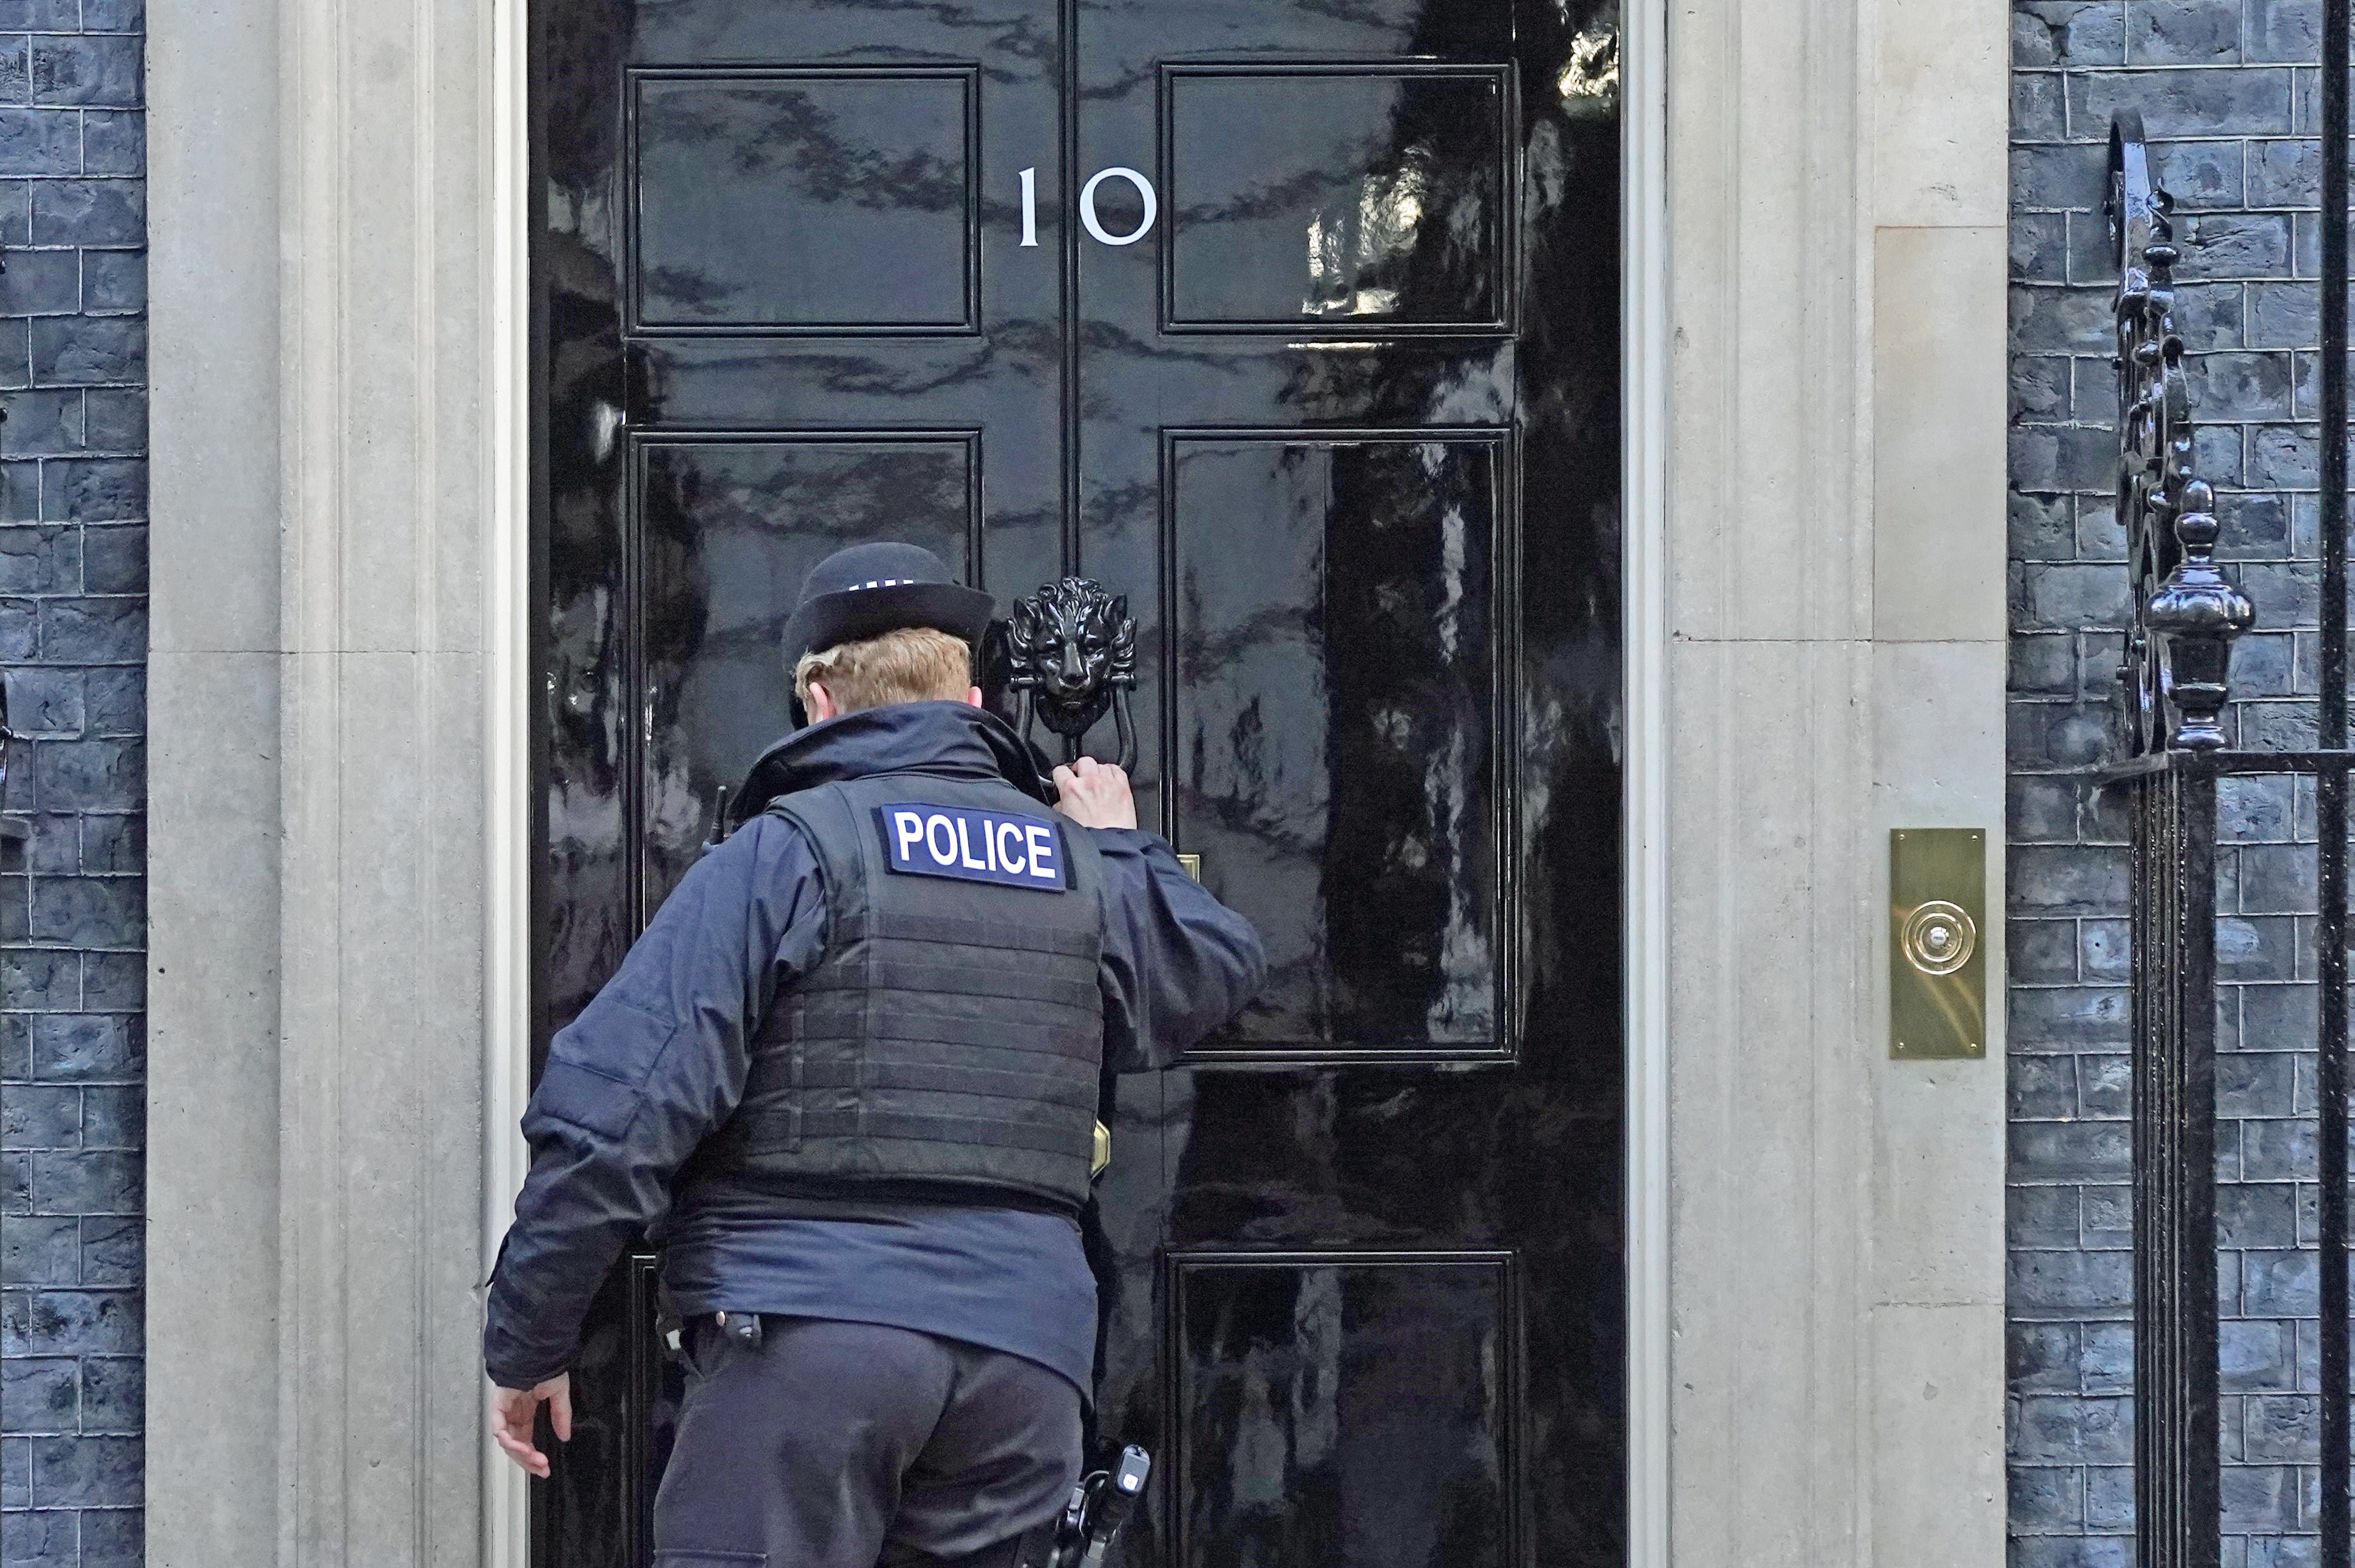 Kit Malthouse said fixed-penalty notices are issued when police believe the law has been broken (Stefan Rousseau/PA)